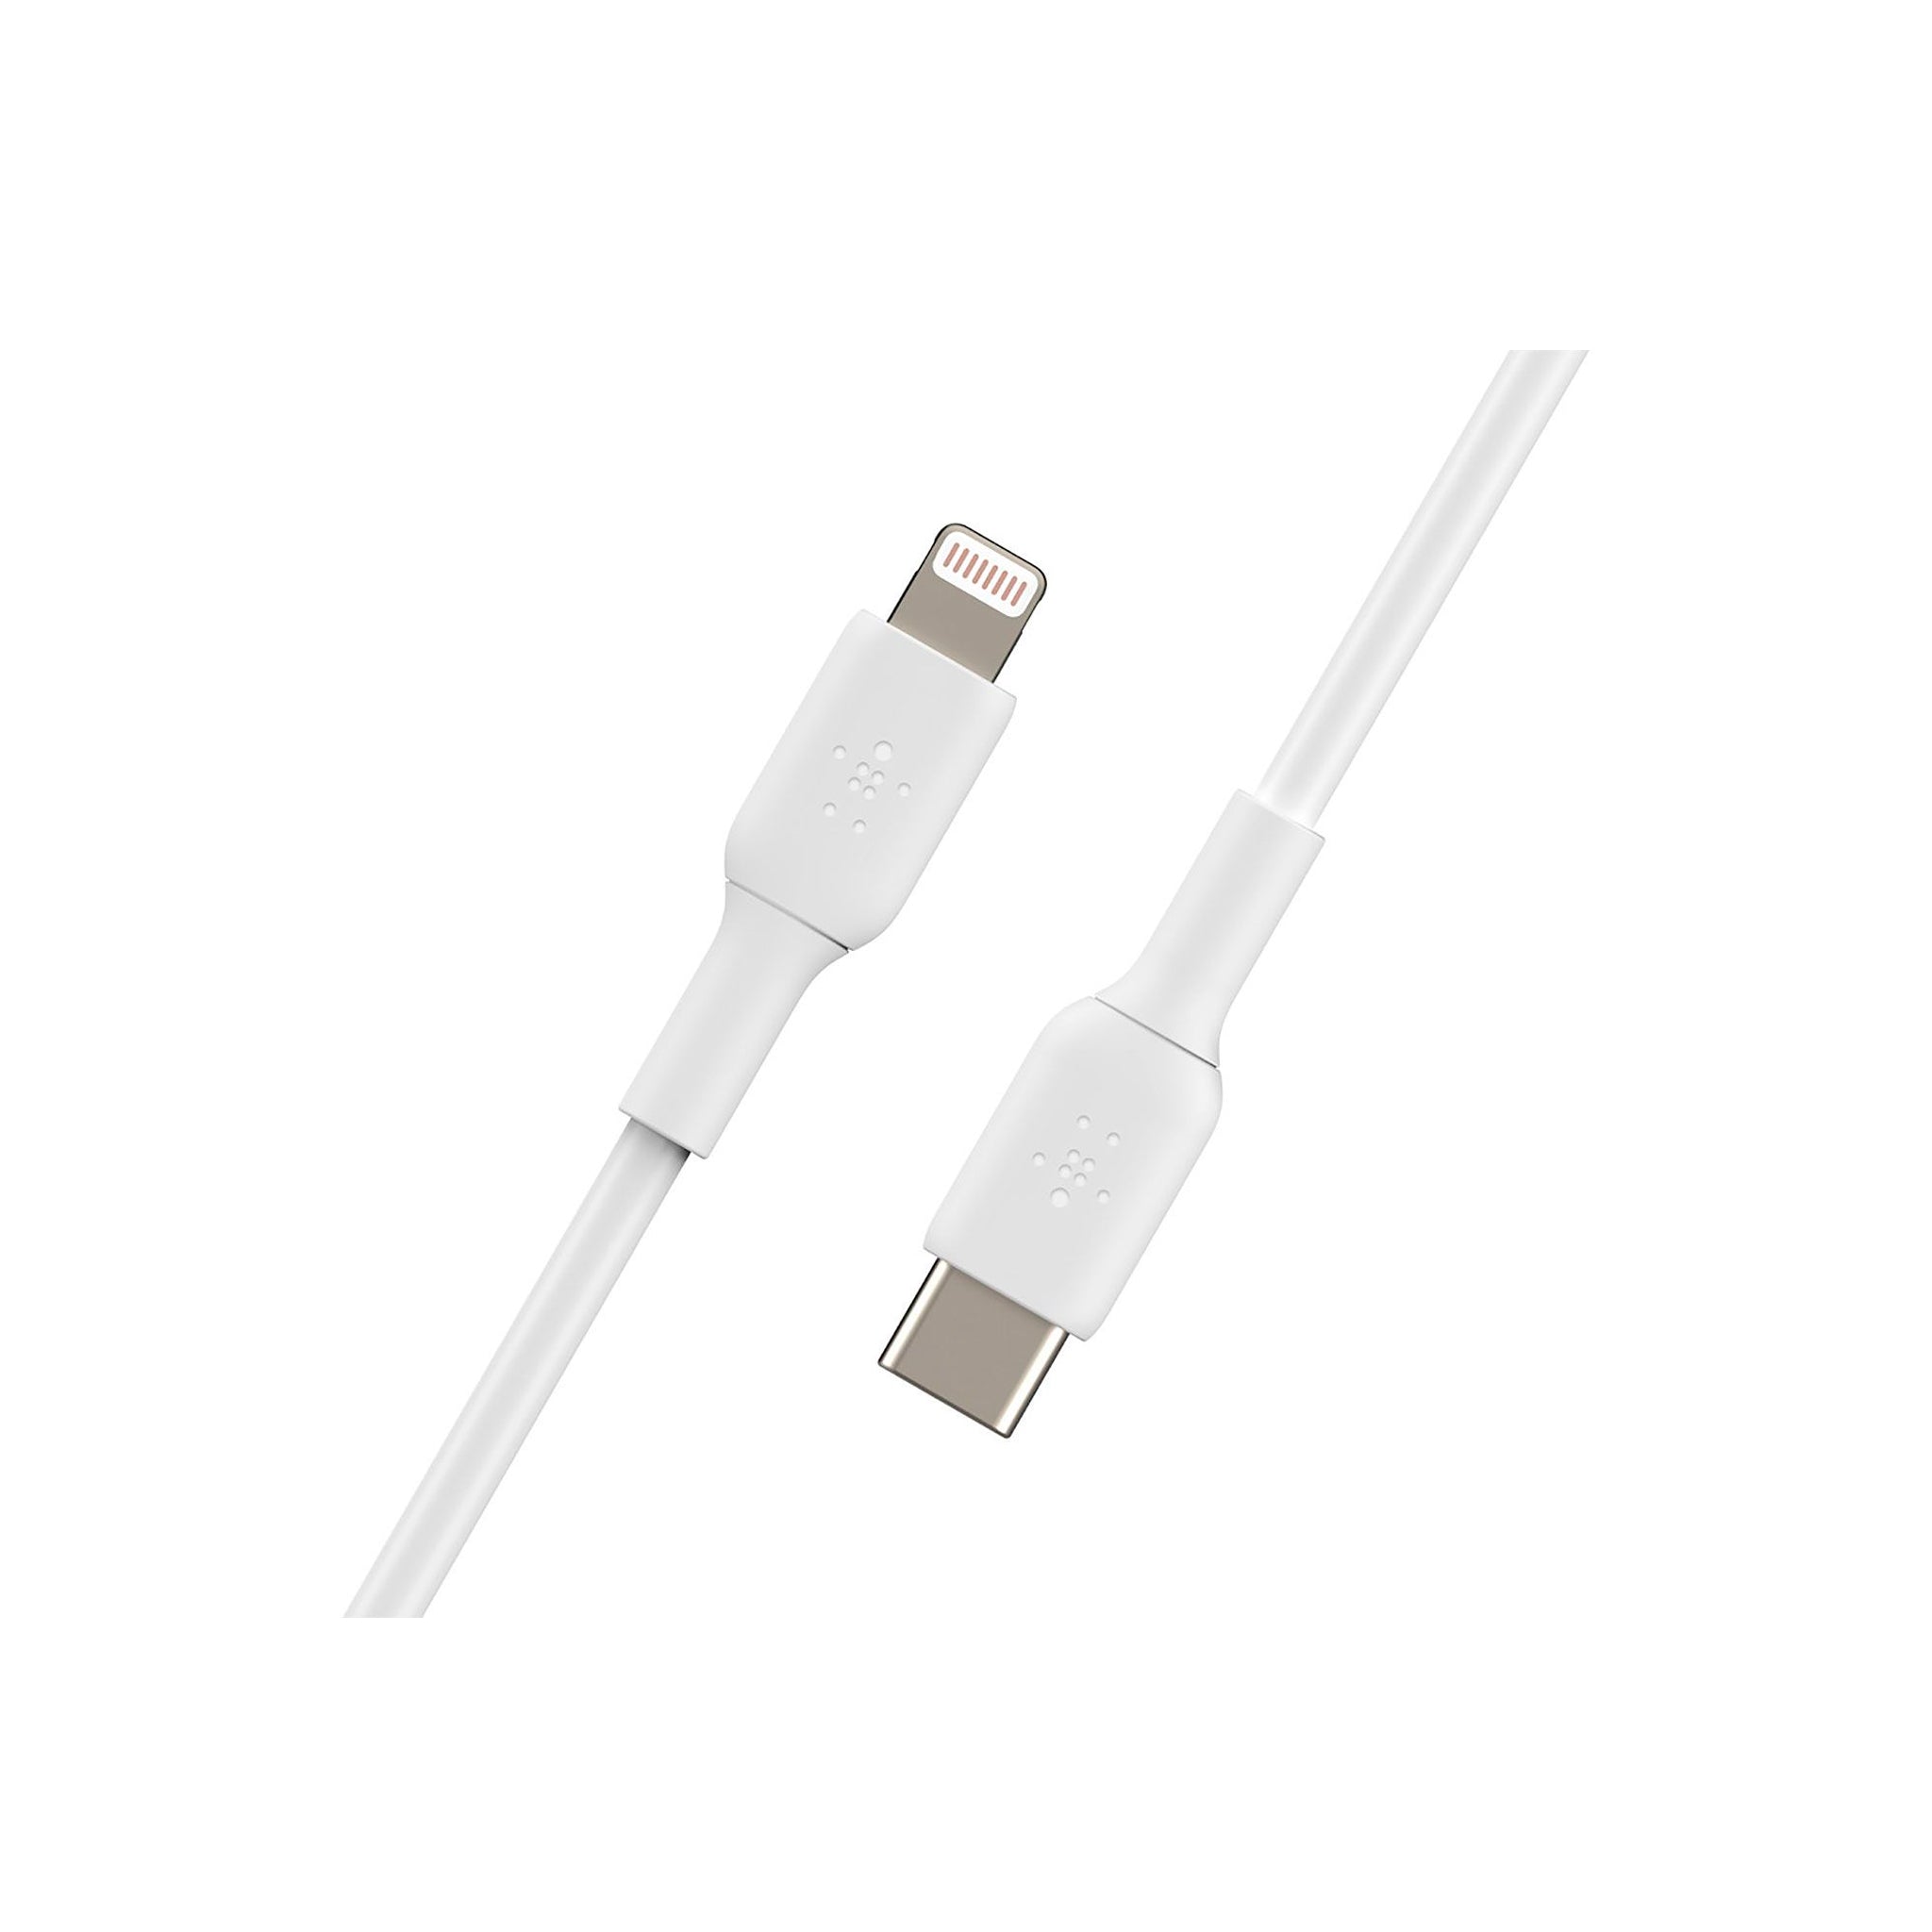 Belkin - Boost Up Charge Usb C To Apple Lightning Cable 3ft - White